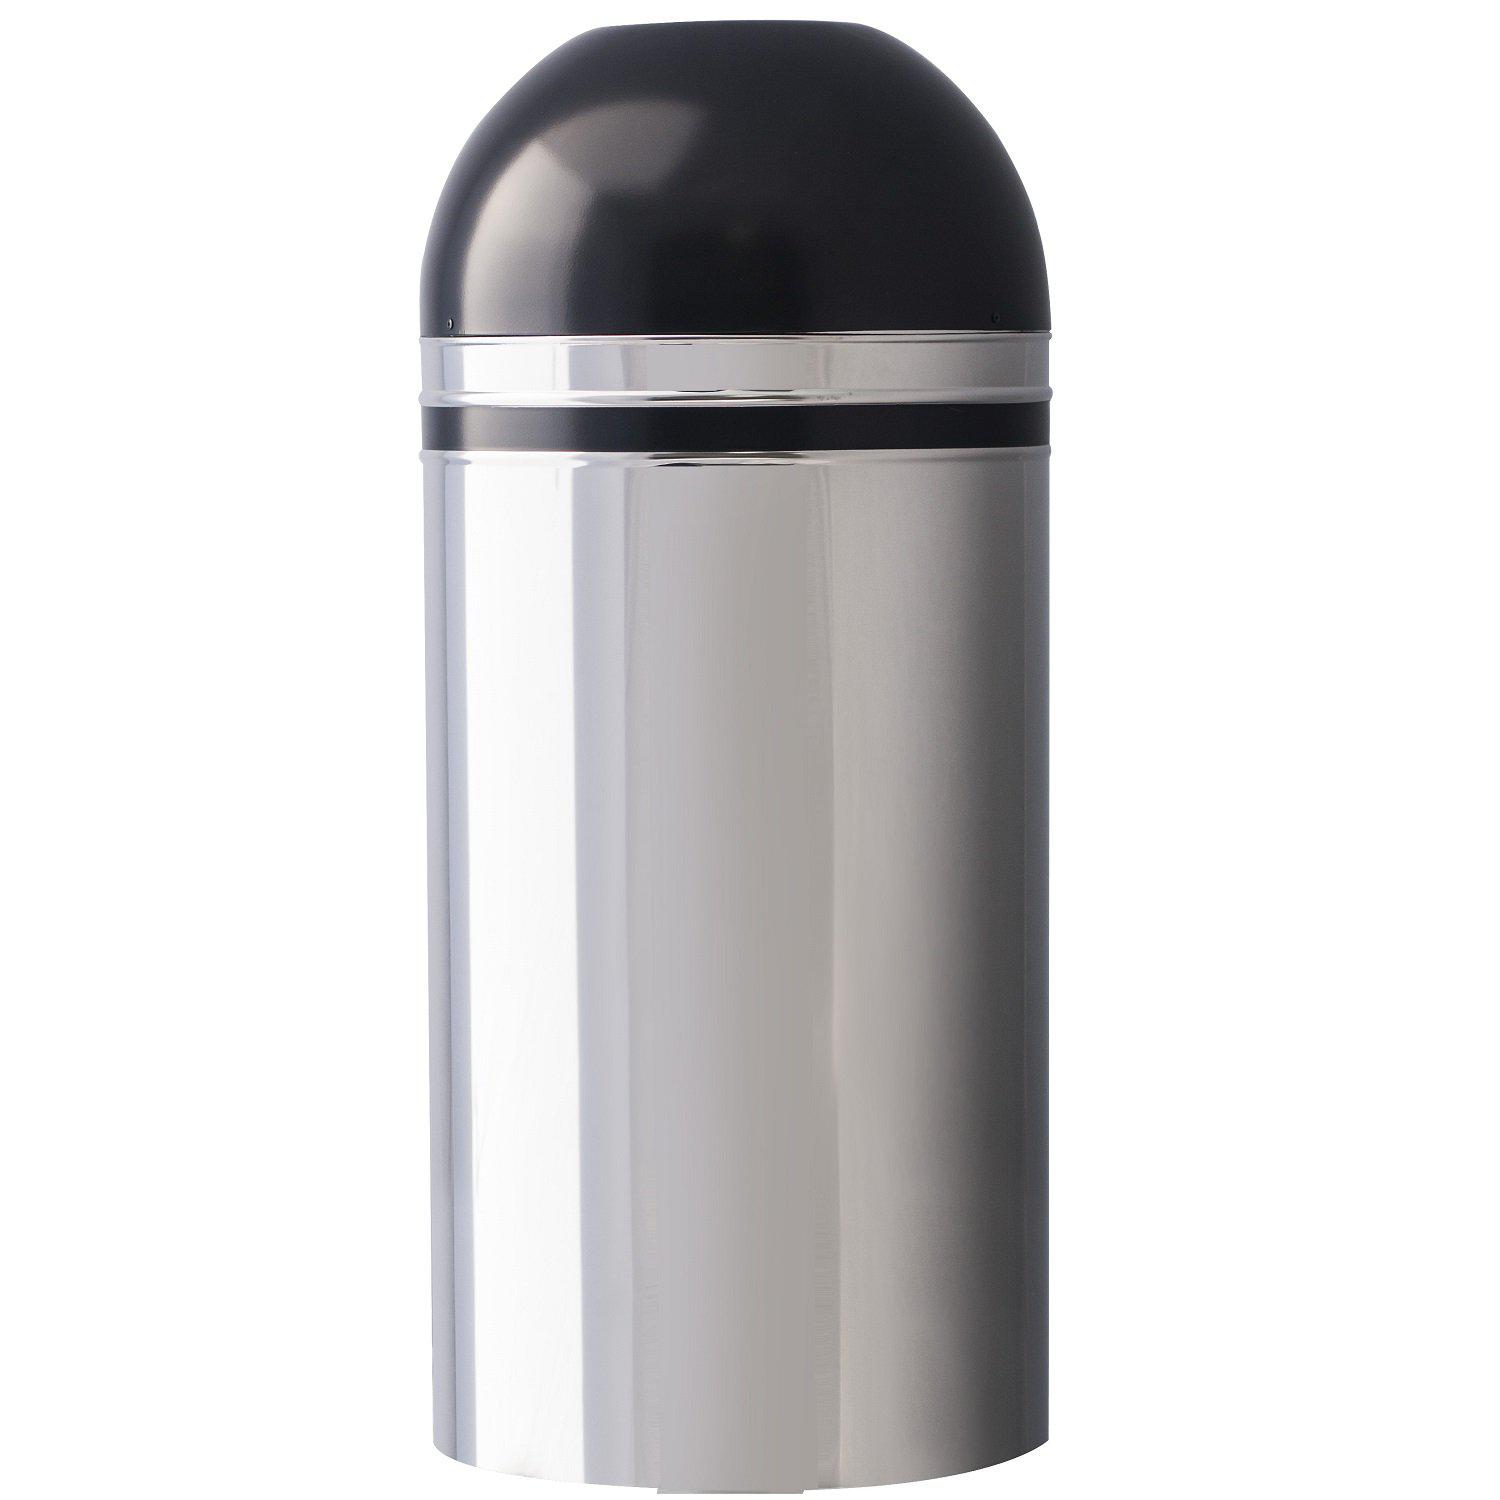 Monarch Series Open Dome Top Indoor Waste Receptacle, 15-Gallon Capacity, Chrome with Black Accents